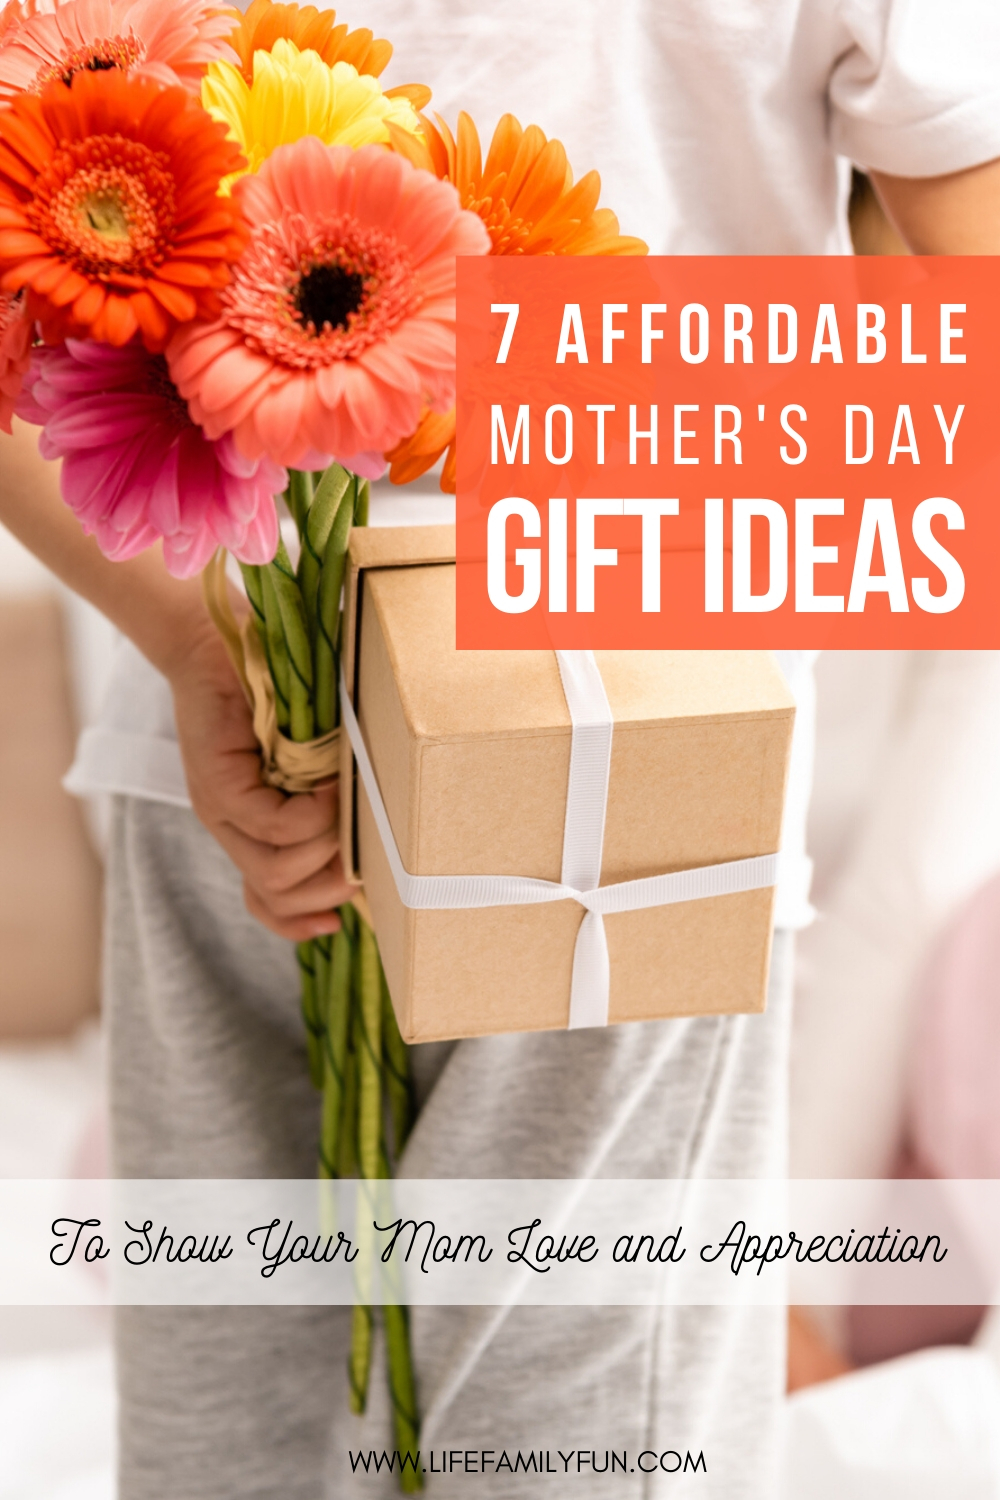 7 Affordable Mother's Day Gift Ideas To Show Your Mom Gratitude